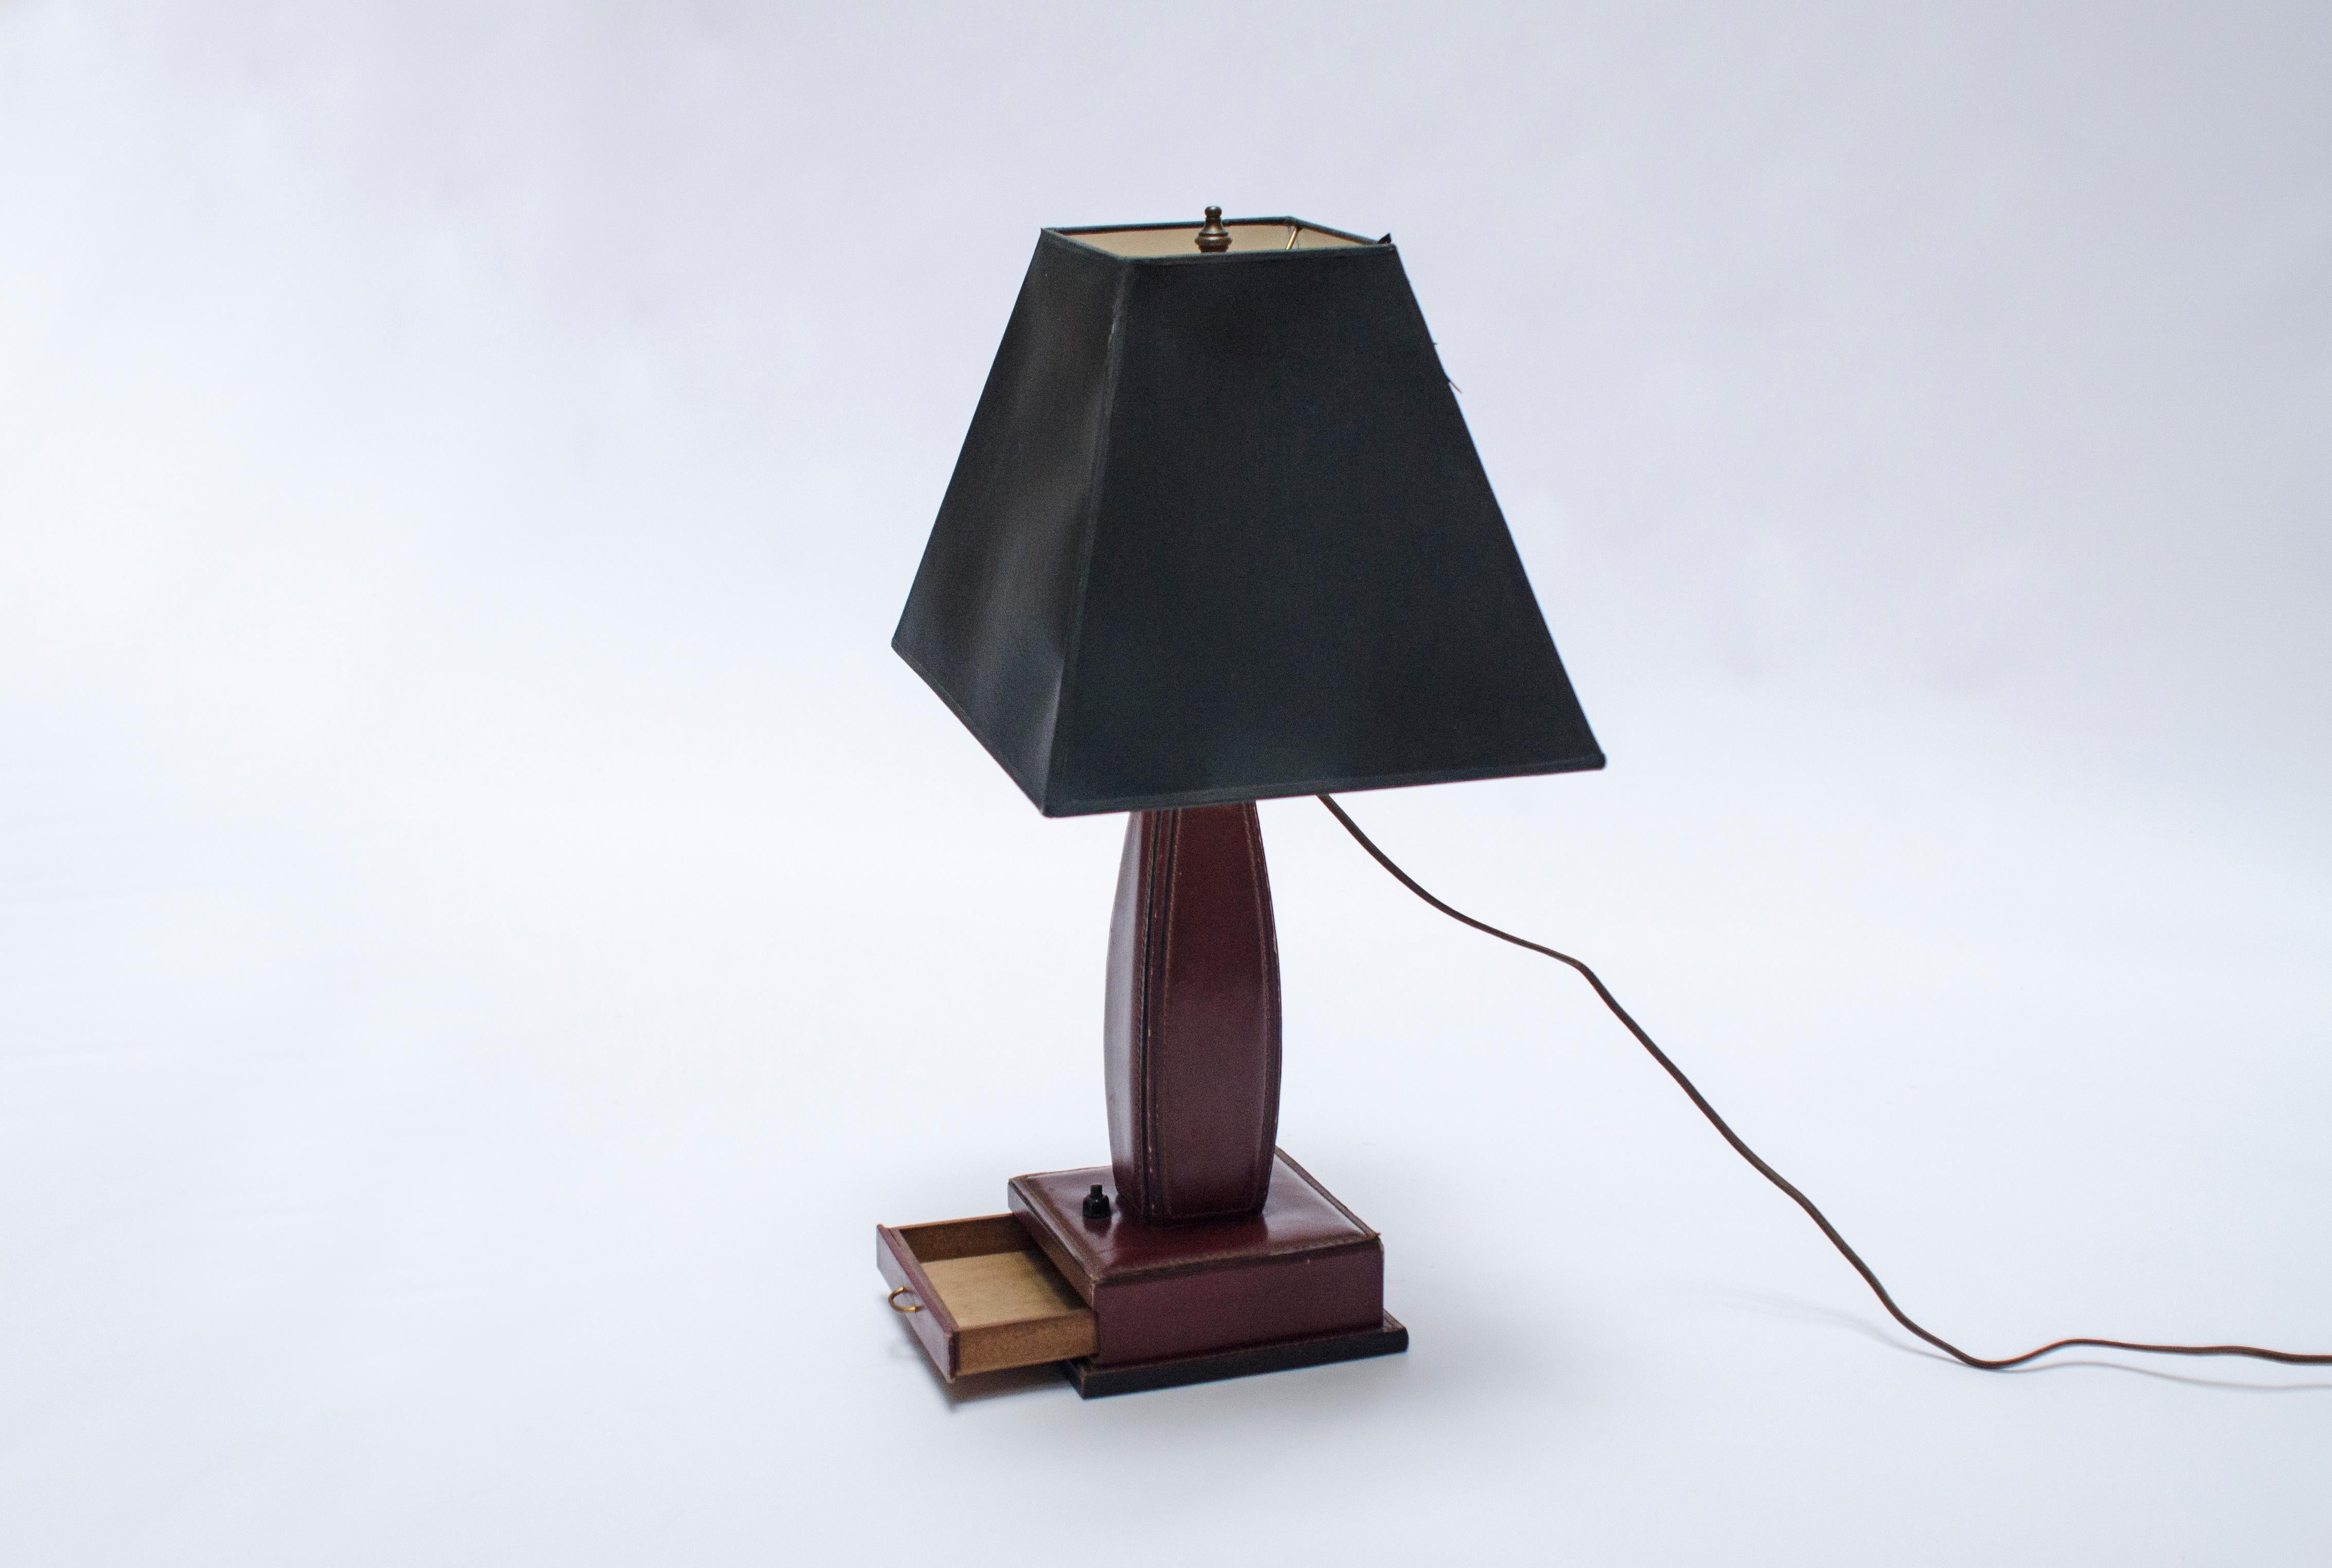 Desk lamp made of wood covered in leather with visible stitching and drawer detail. Design by Jacques Adnet (1900-1984).

France, CIRCA 1950.

(Does not include screen)